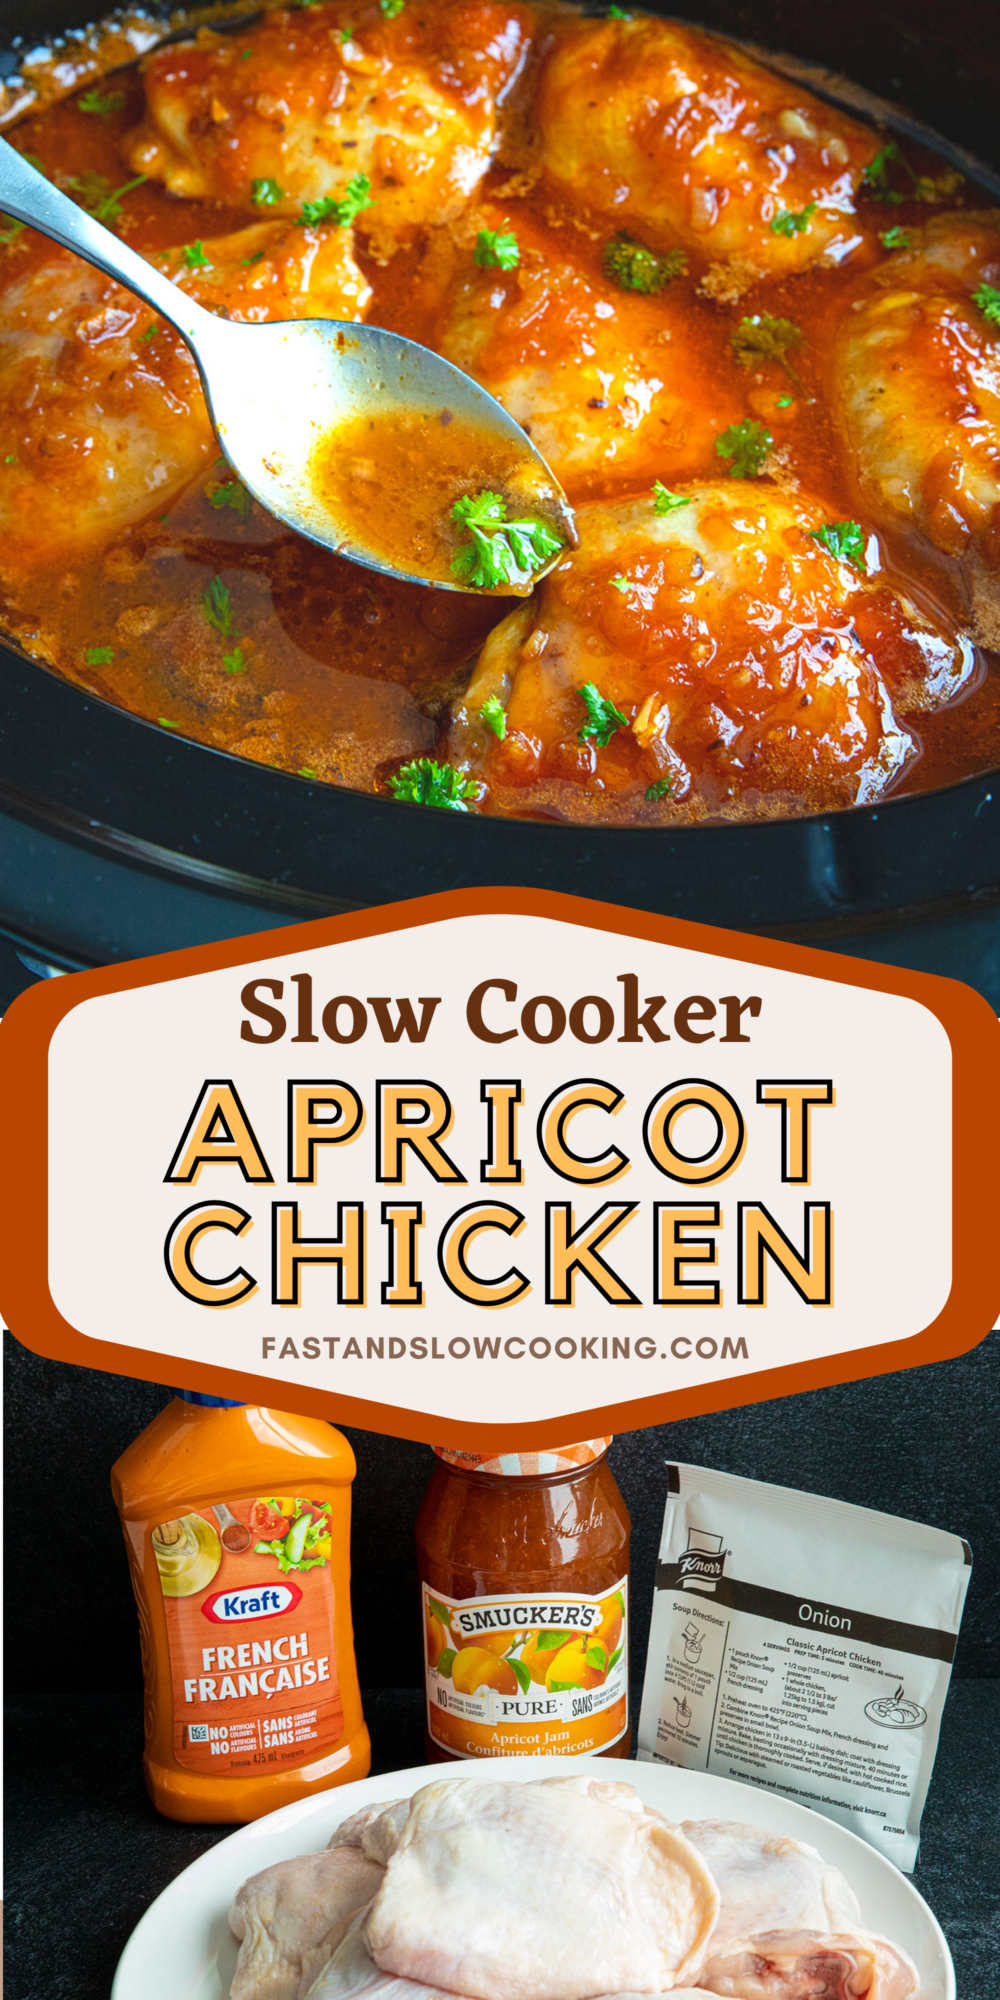 The classic apricot chicken is cooked low and slow all day long in your slow cooker, yielding tender, fall-off-the-bone chicken thighs in a delicious sauce!
